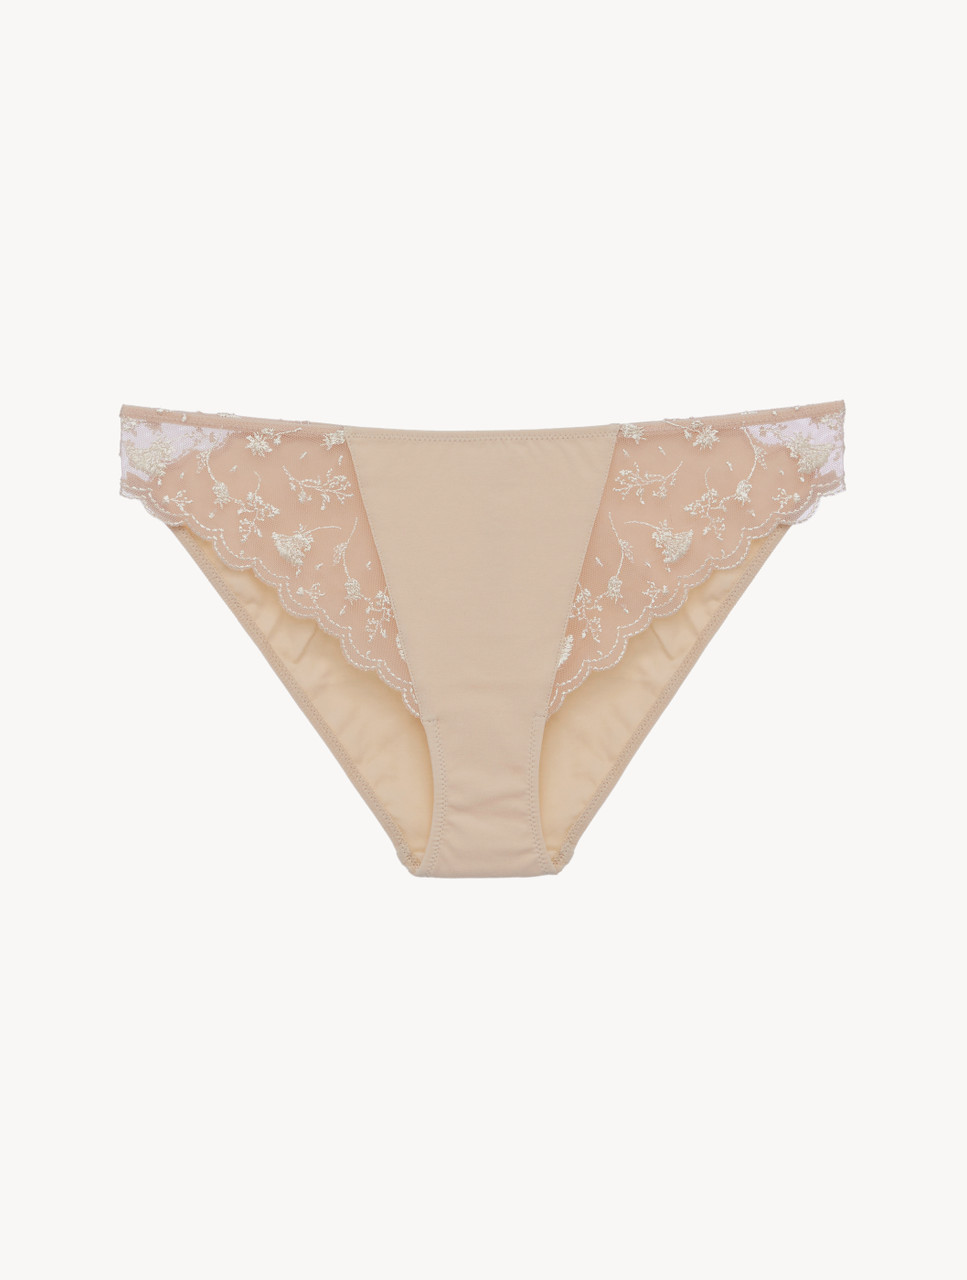 Push Up Bra in Halo and Ivory Nude with embroidered tulle